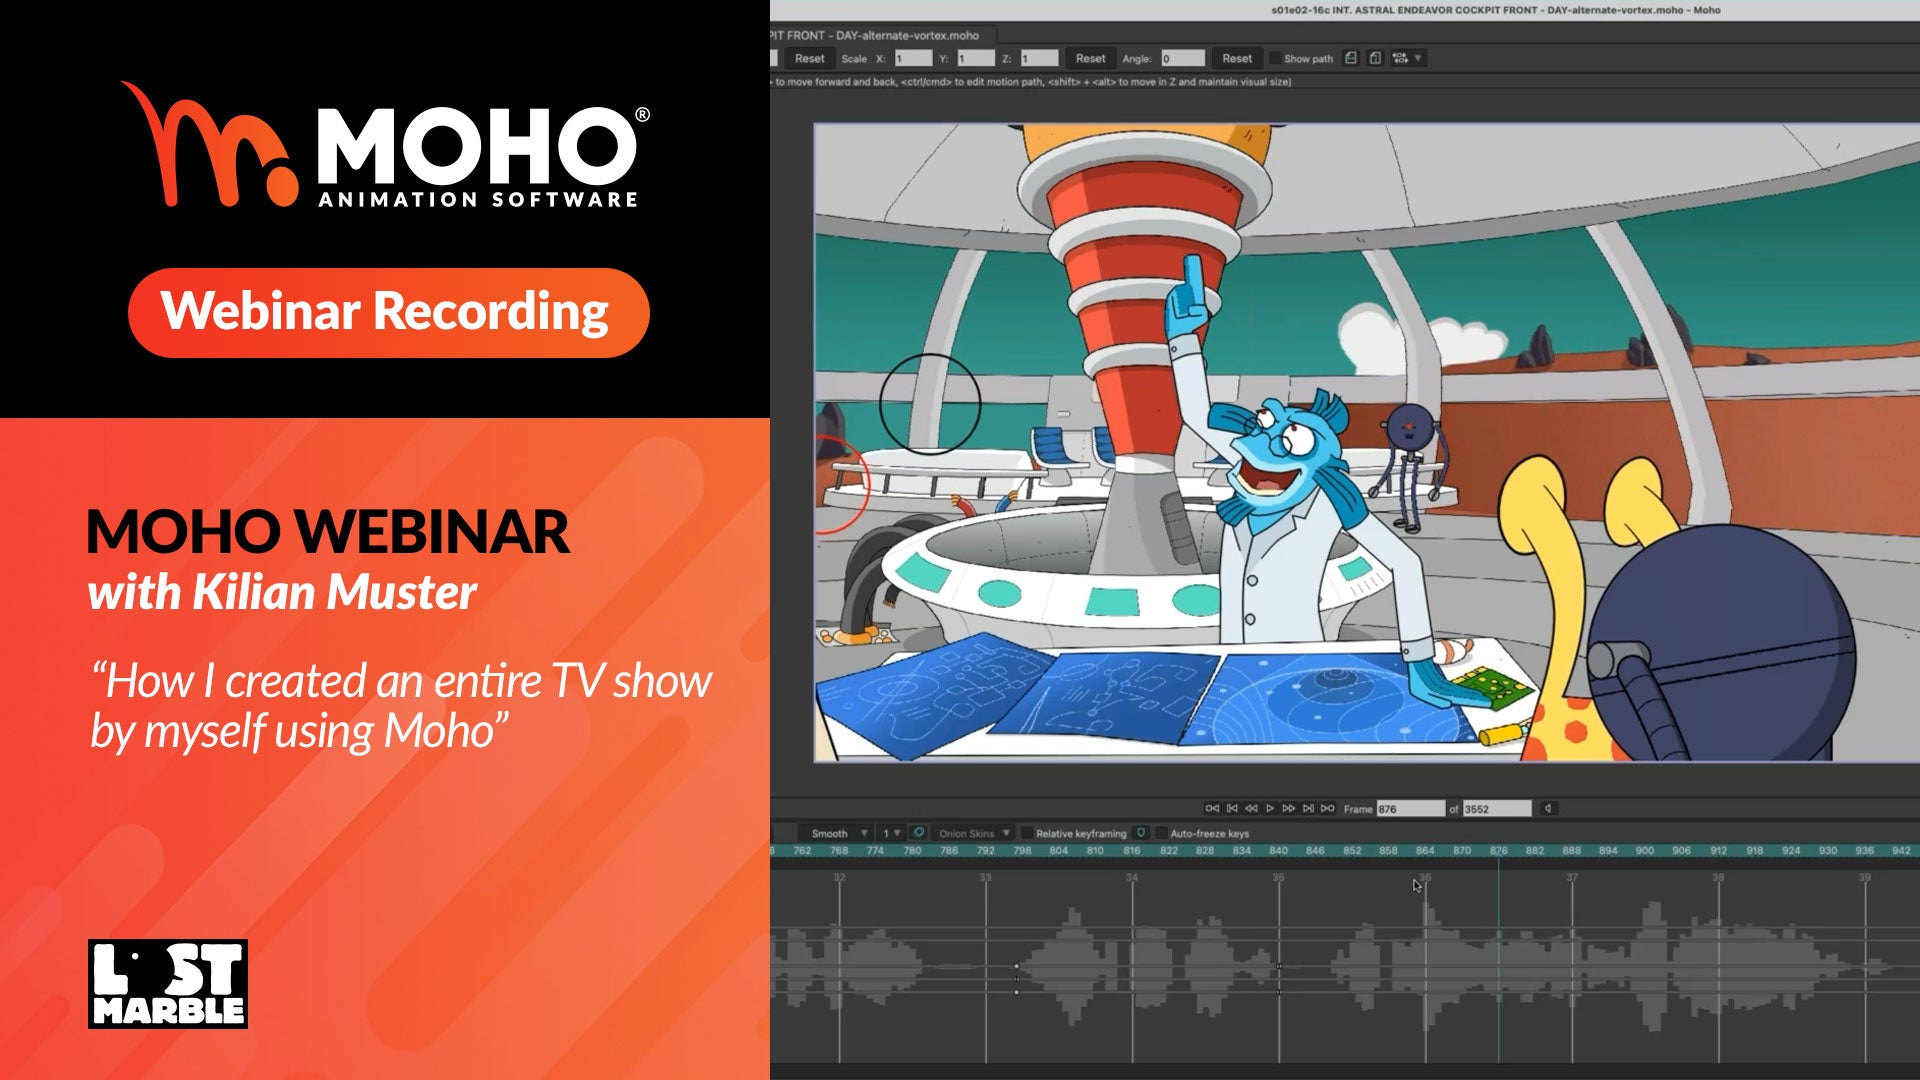 Webinar recording: How I created an entire TV show by myself using Moho with Kilian Muster